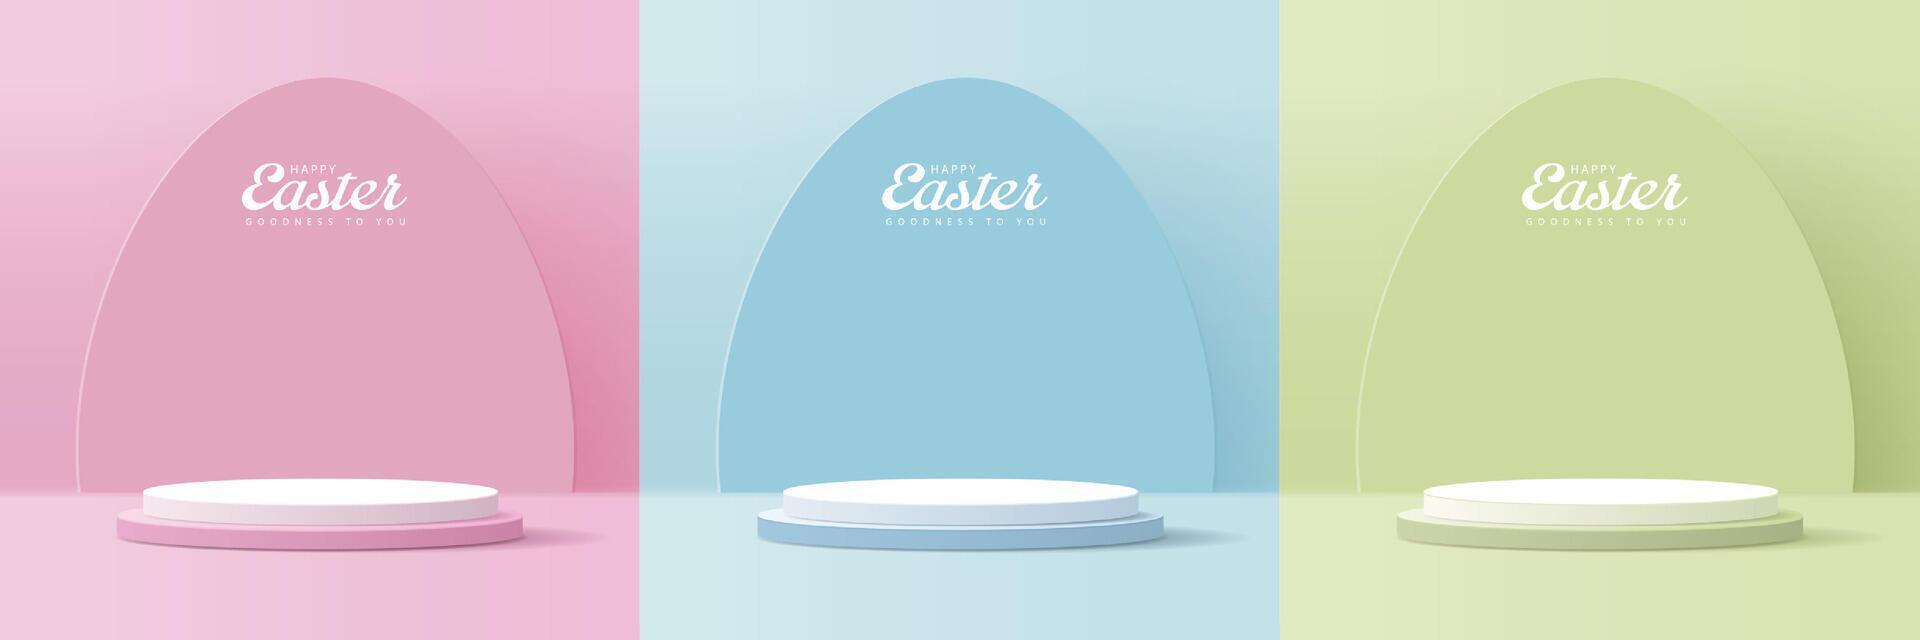 Happy Easter pink,blue and yellow background and podium display for product presentation branding and packaging presentation. studio stage with eggs and rabbit background. vector design.